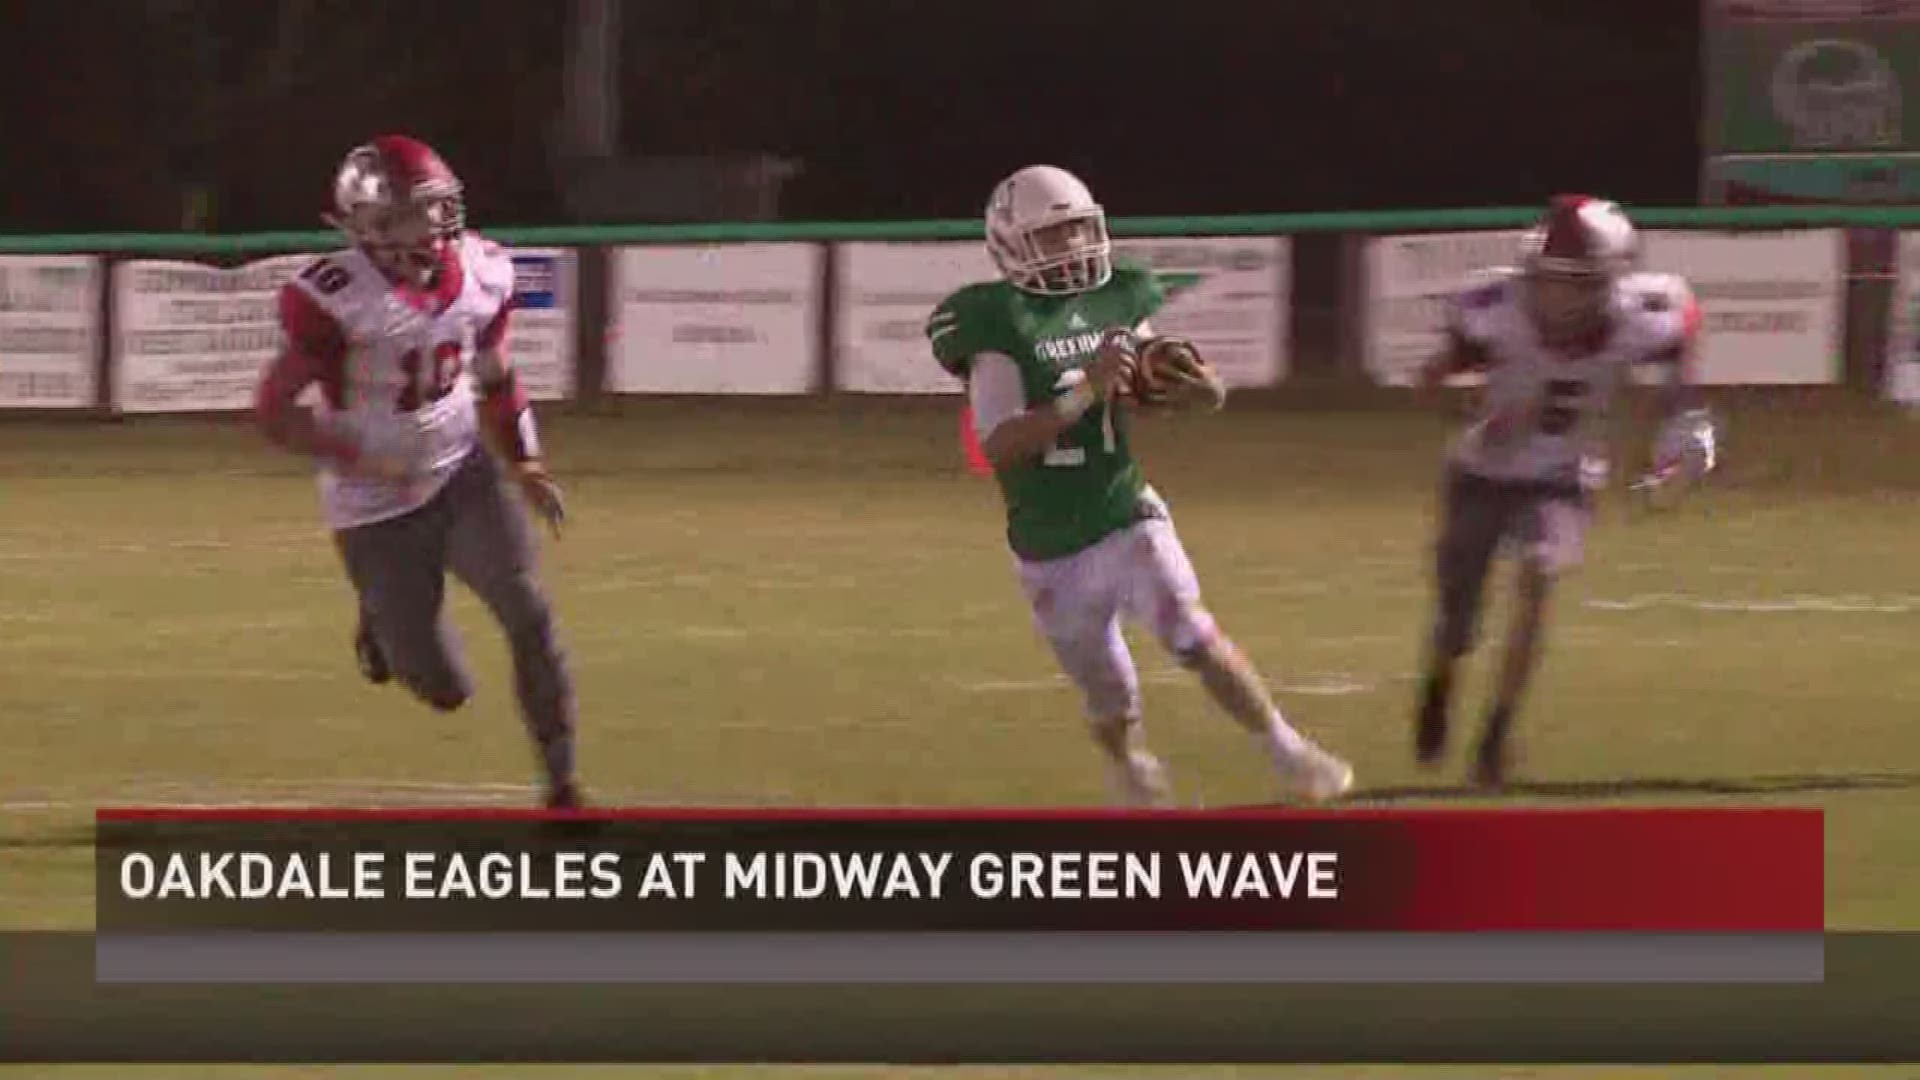 The Green Wave open region plays with a 37-14 win over Oakdale.